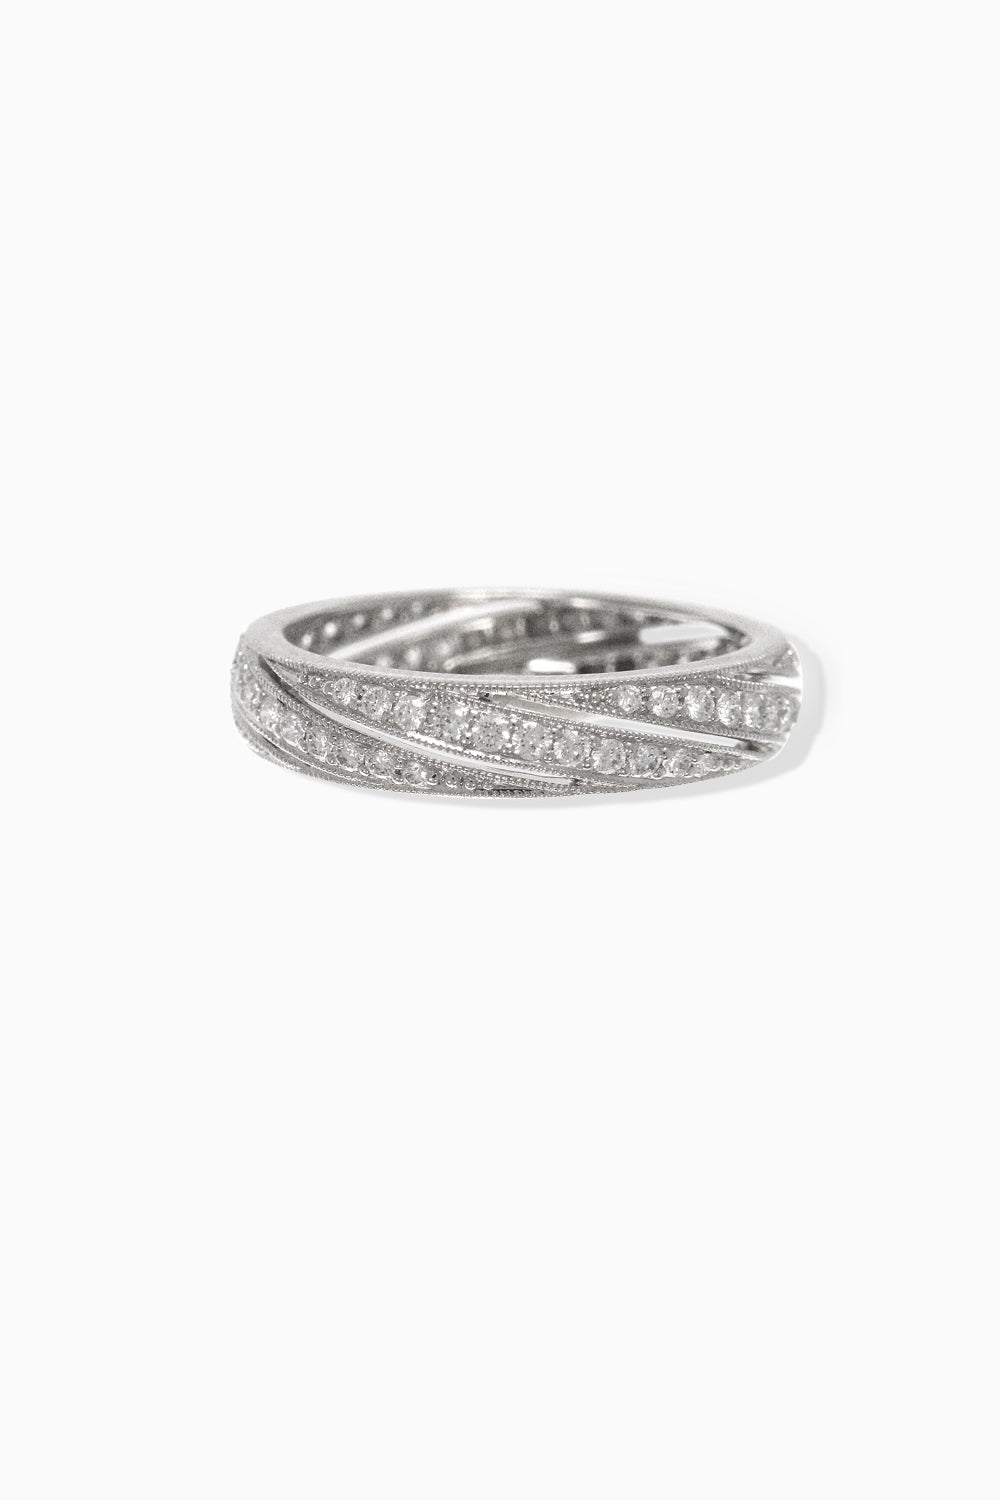 Ray of Light Band in  White Gold